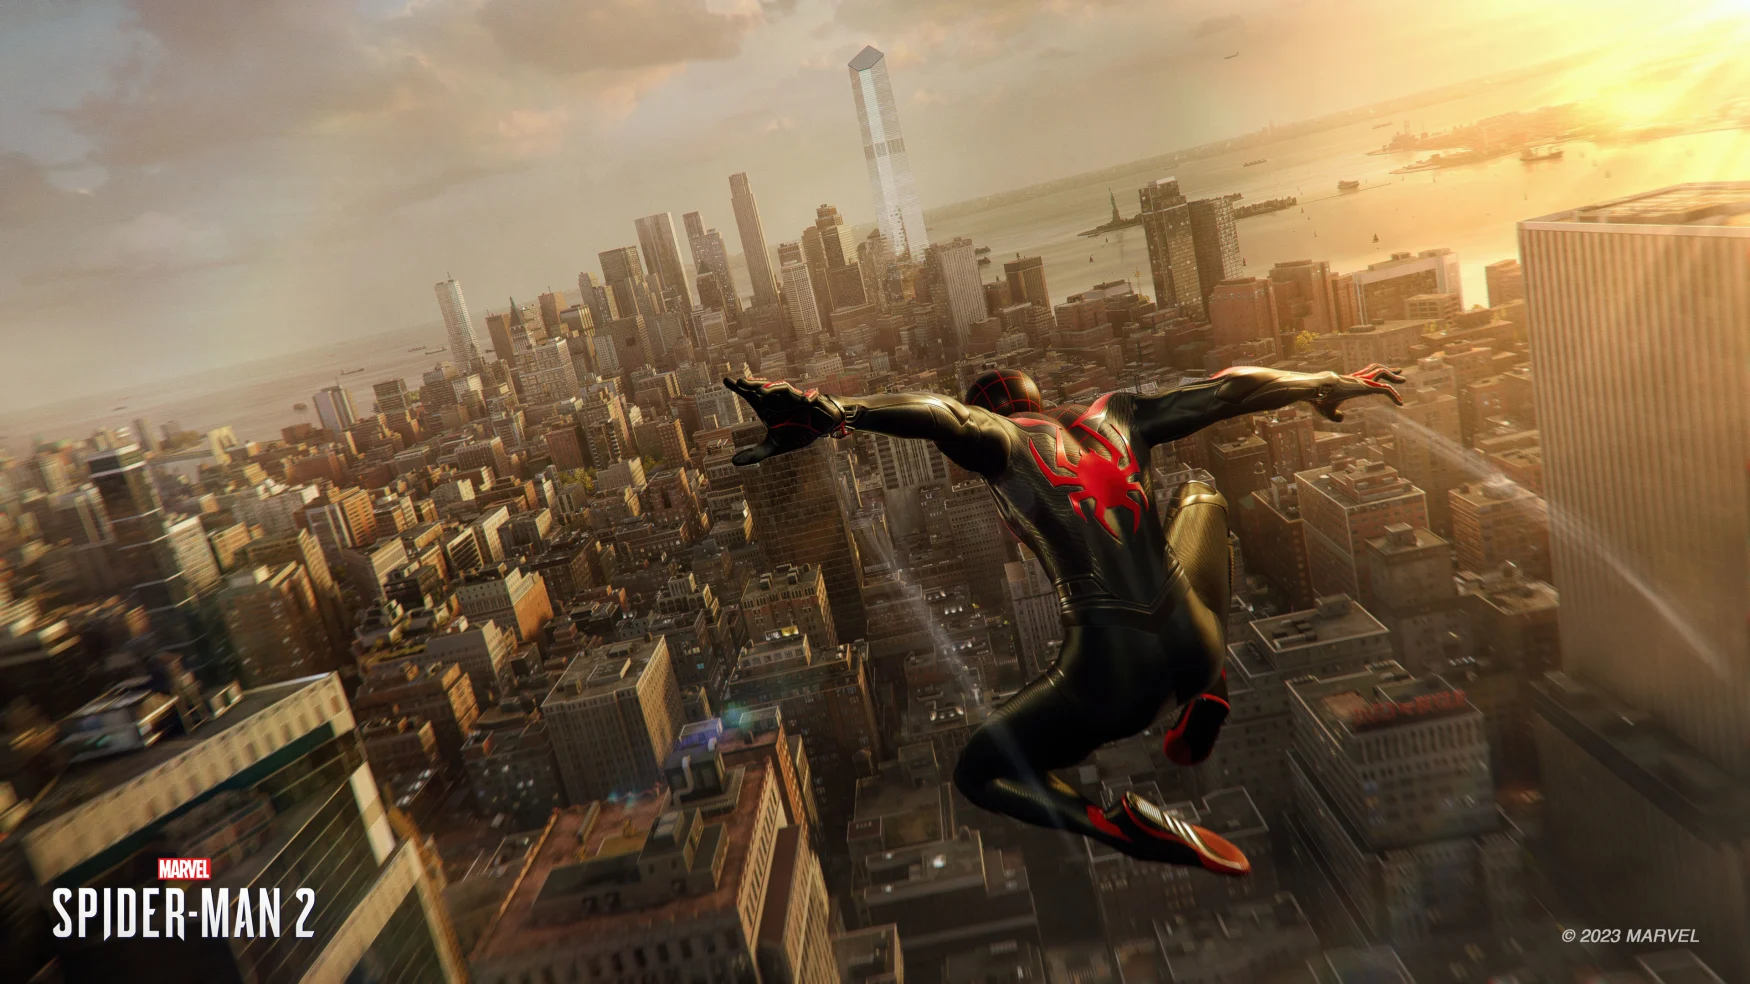 Marvel's Spider-Man 2 has received many positive reviews and